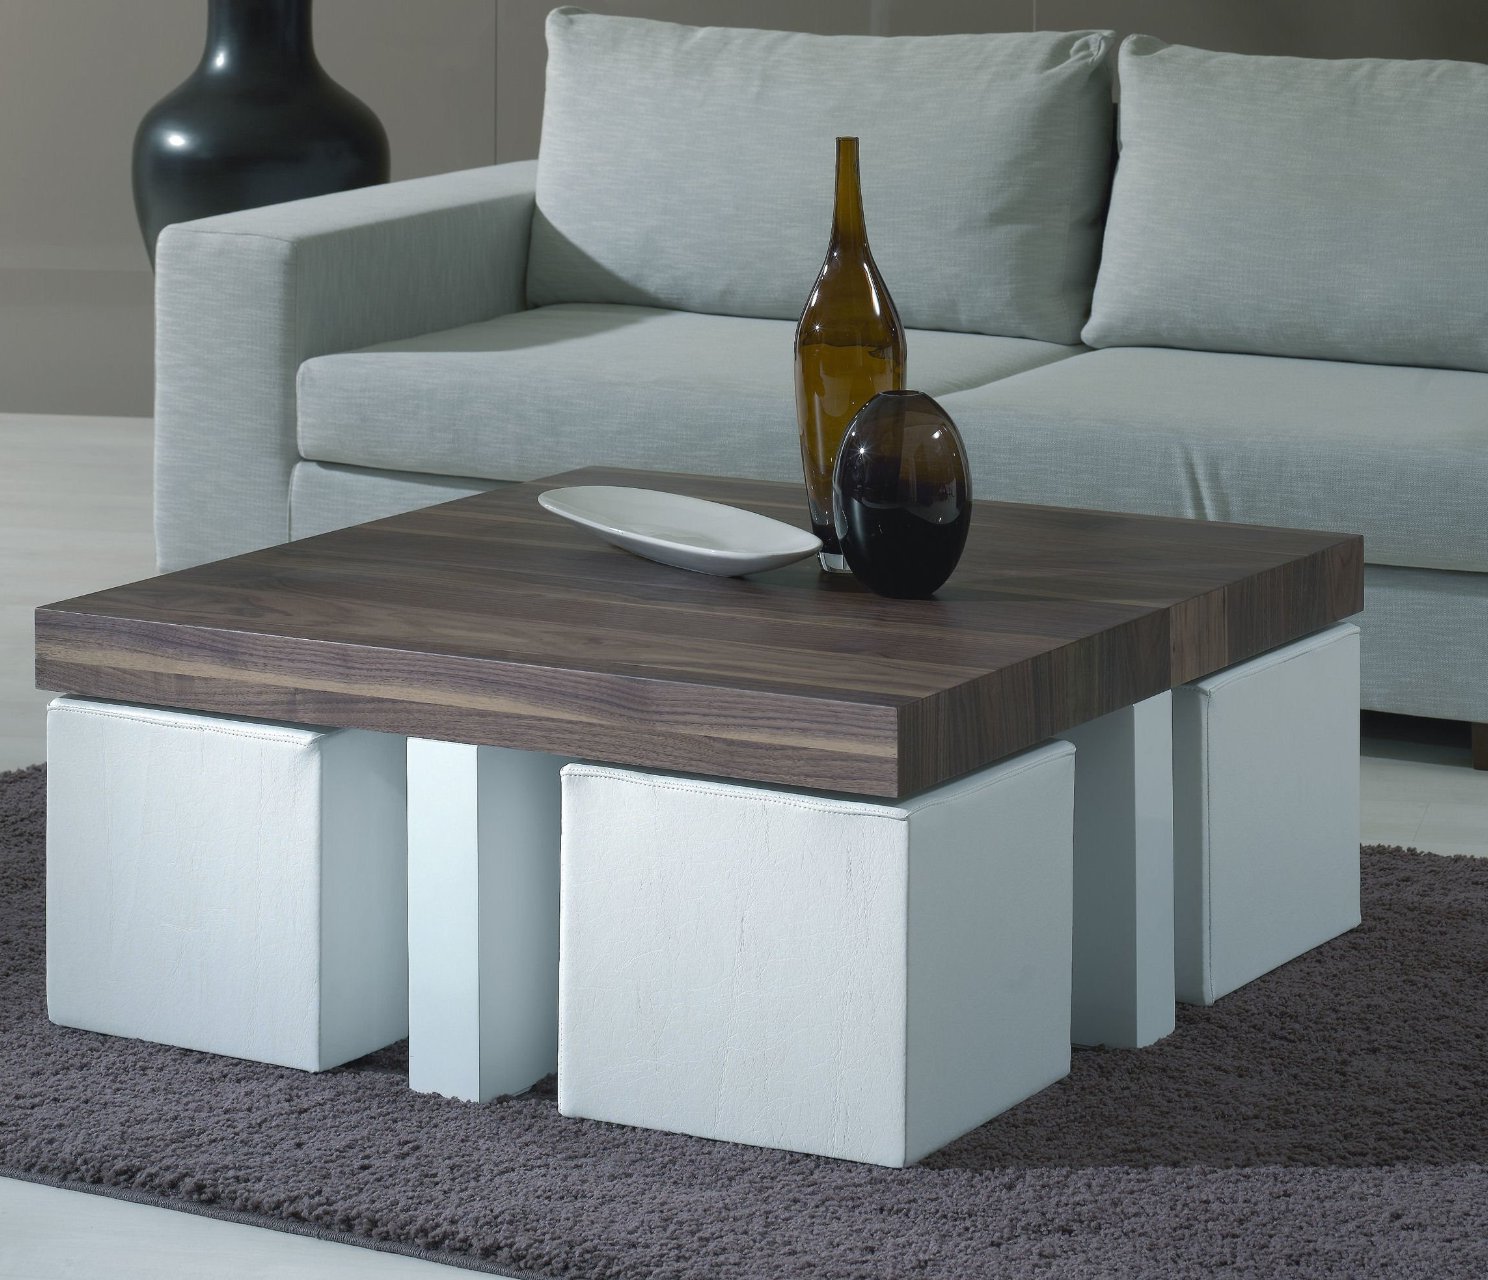 Coffee Table With Chairs Underneath